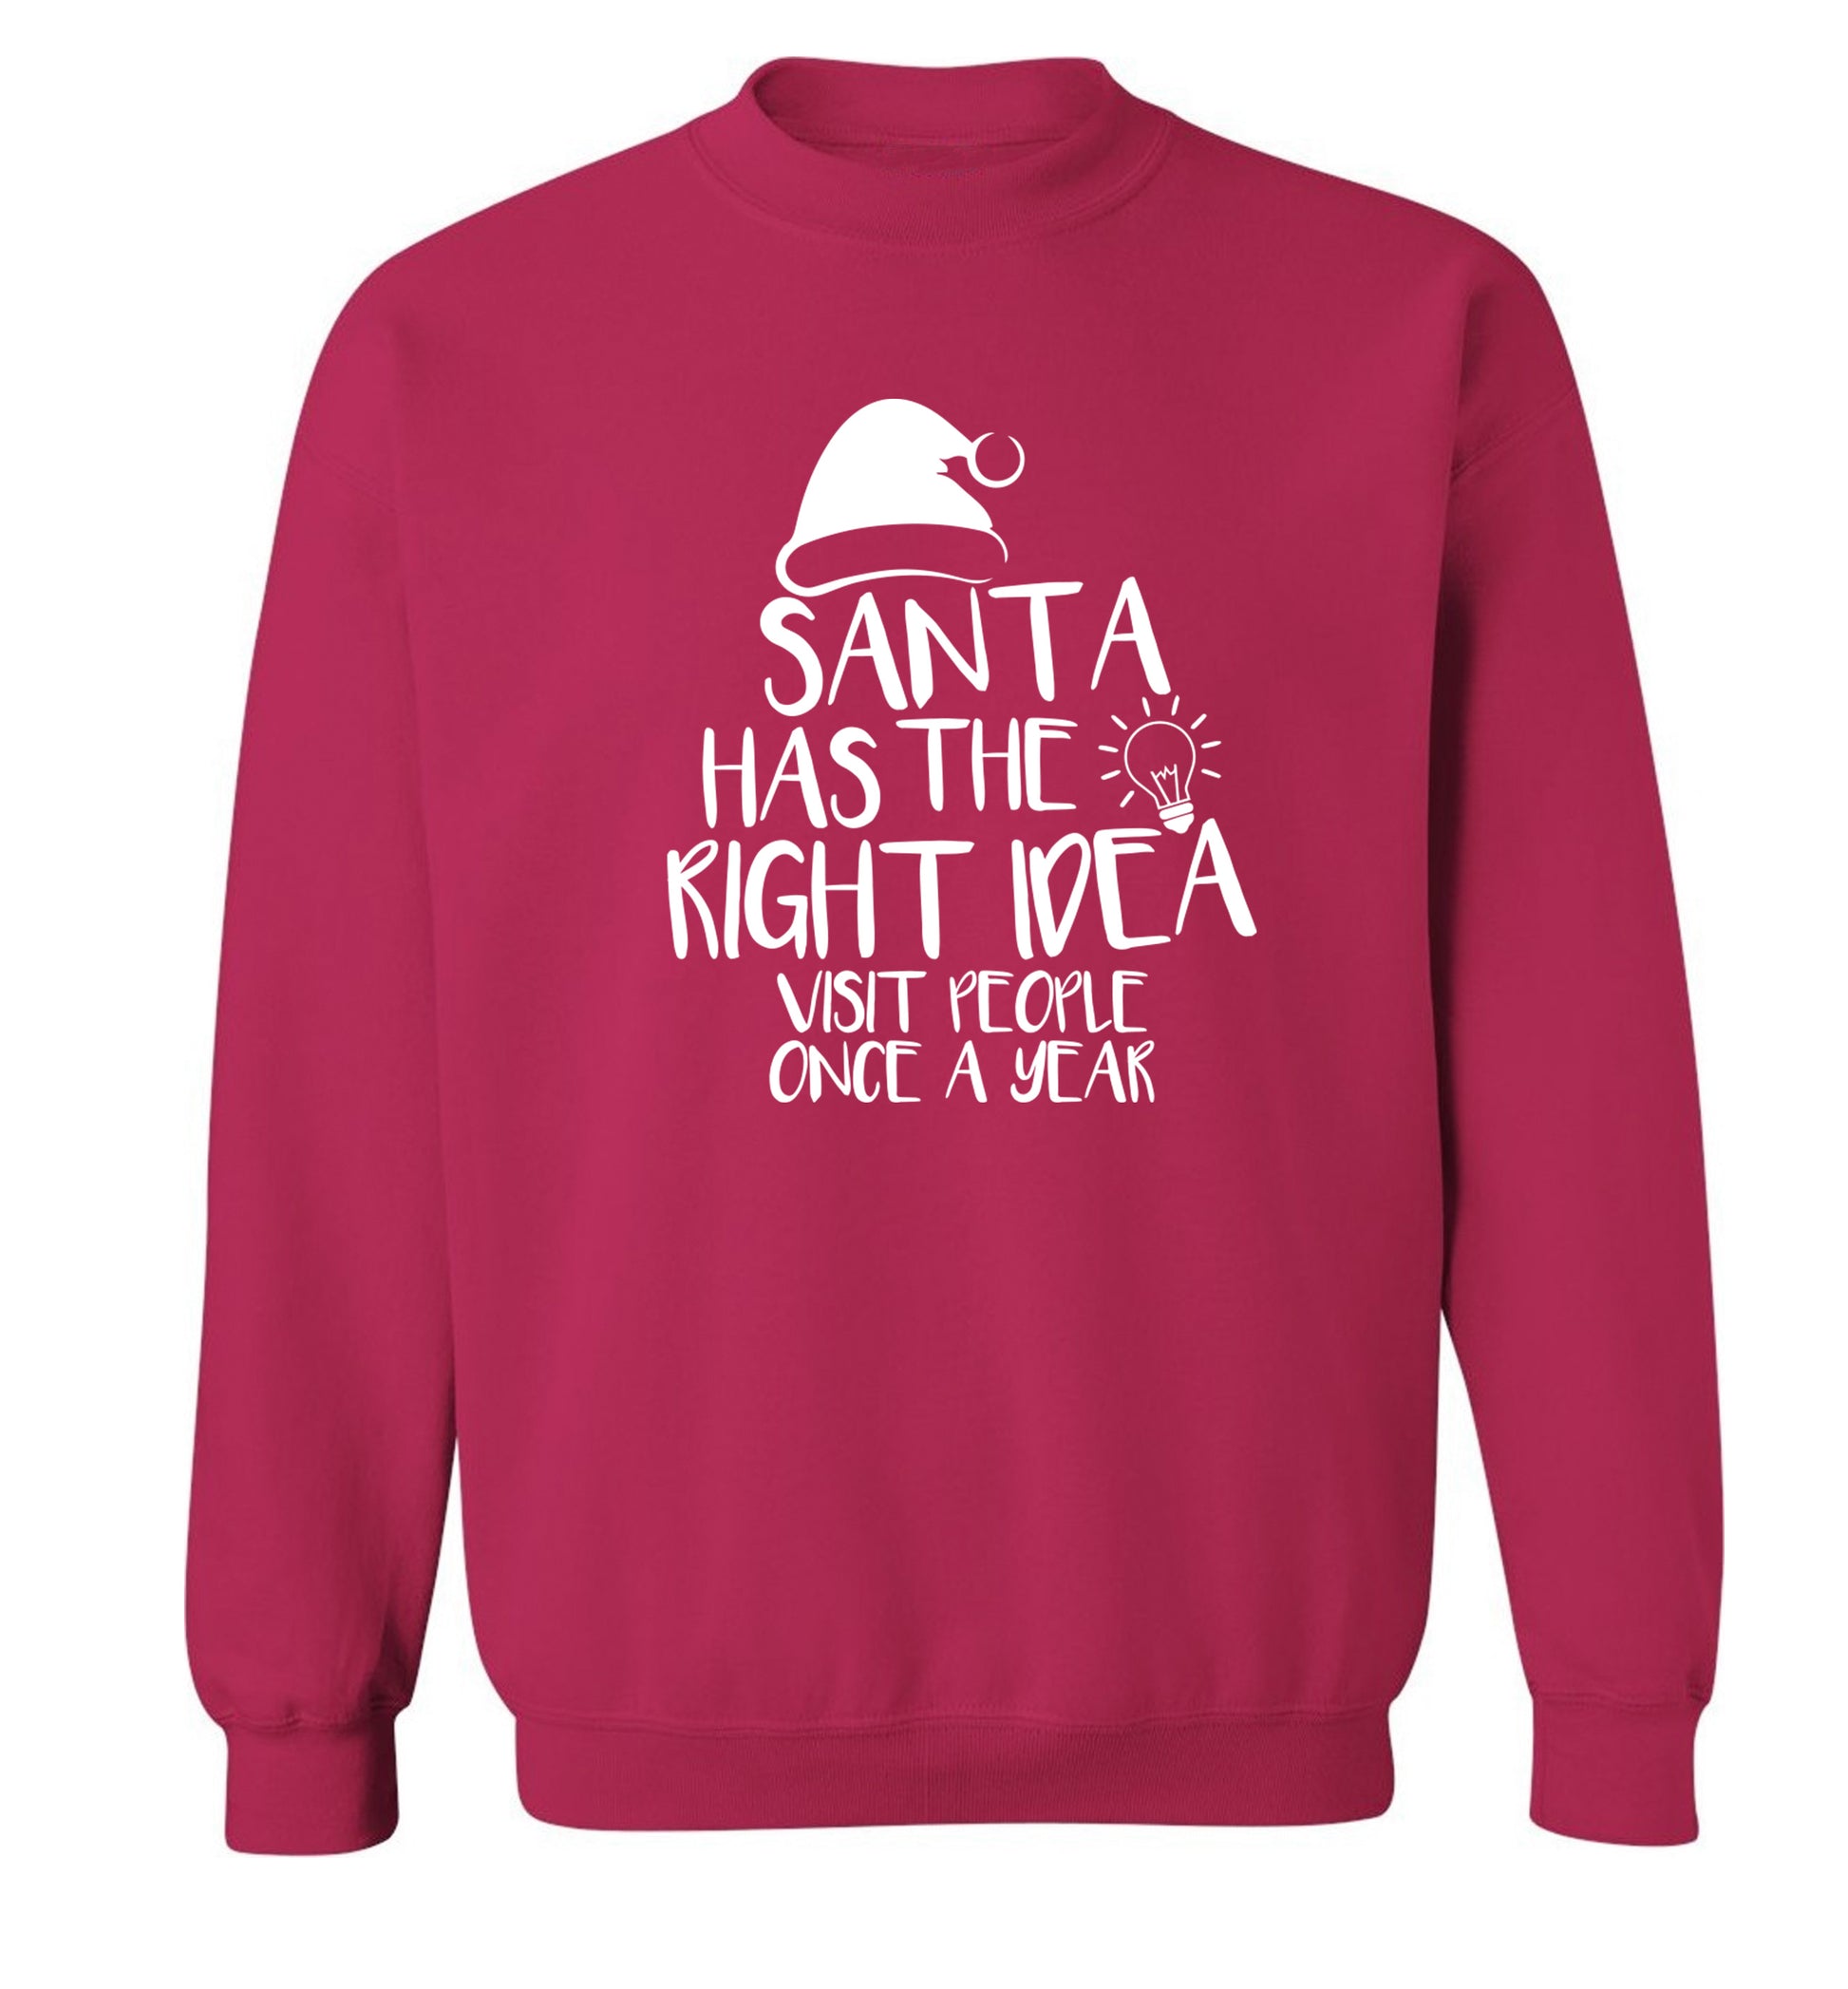 Santa has the right idea visit people once a year Adult's unisex pink Sweater 2XL